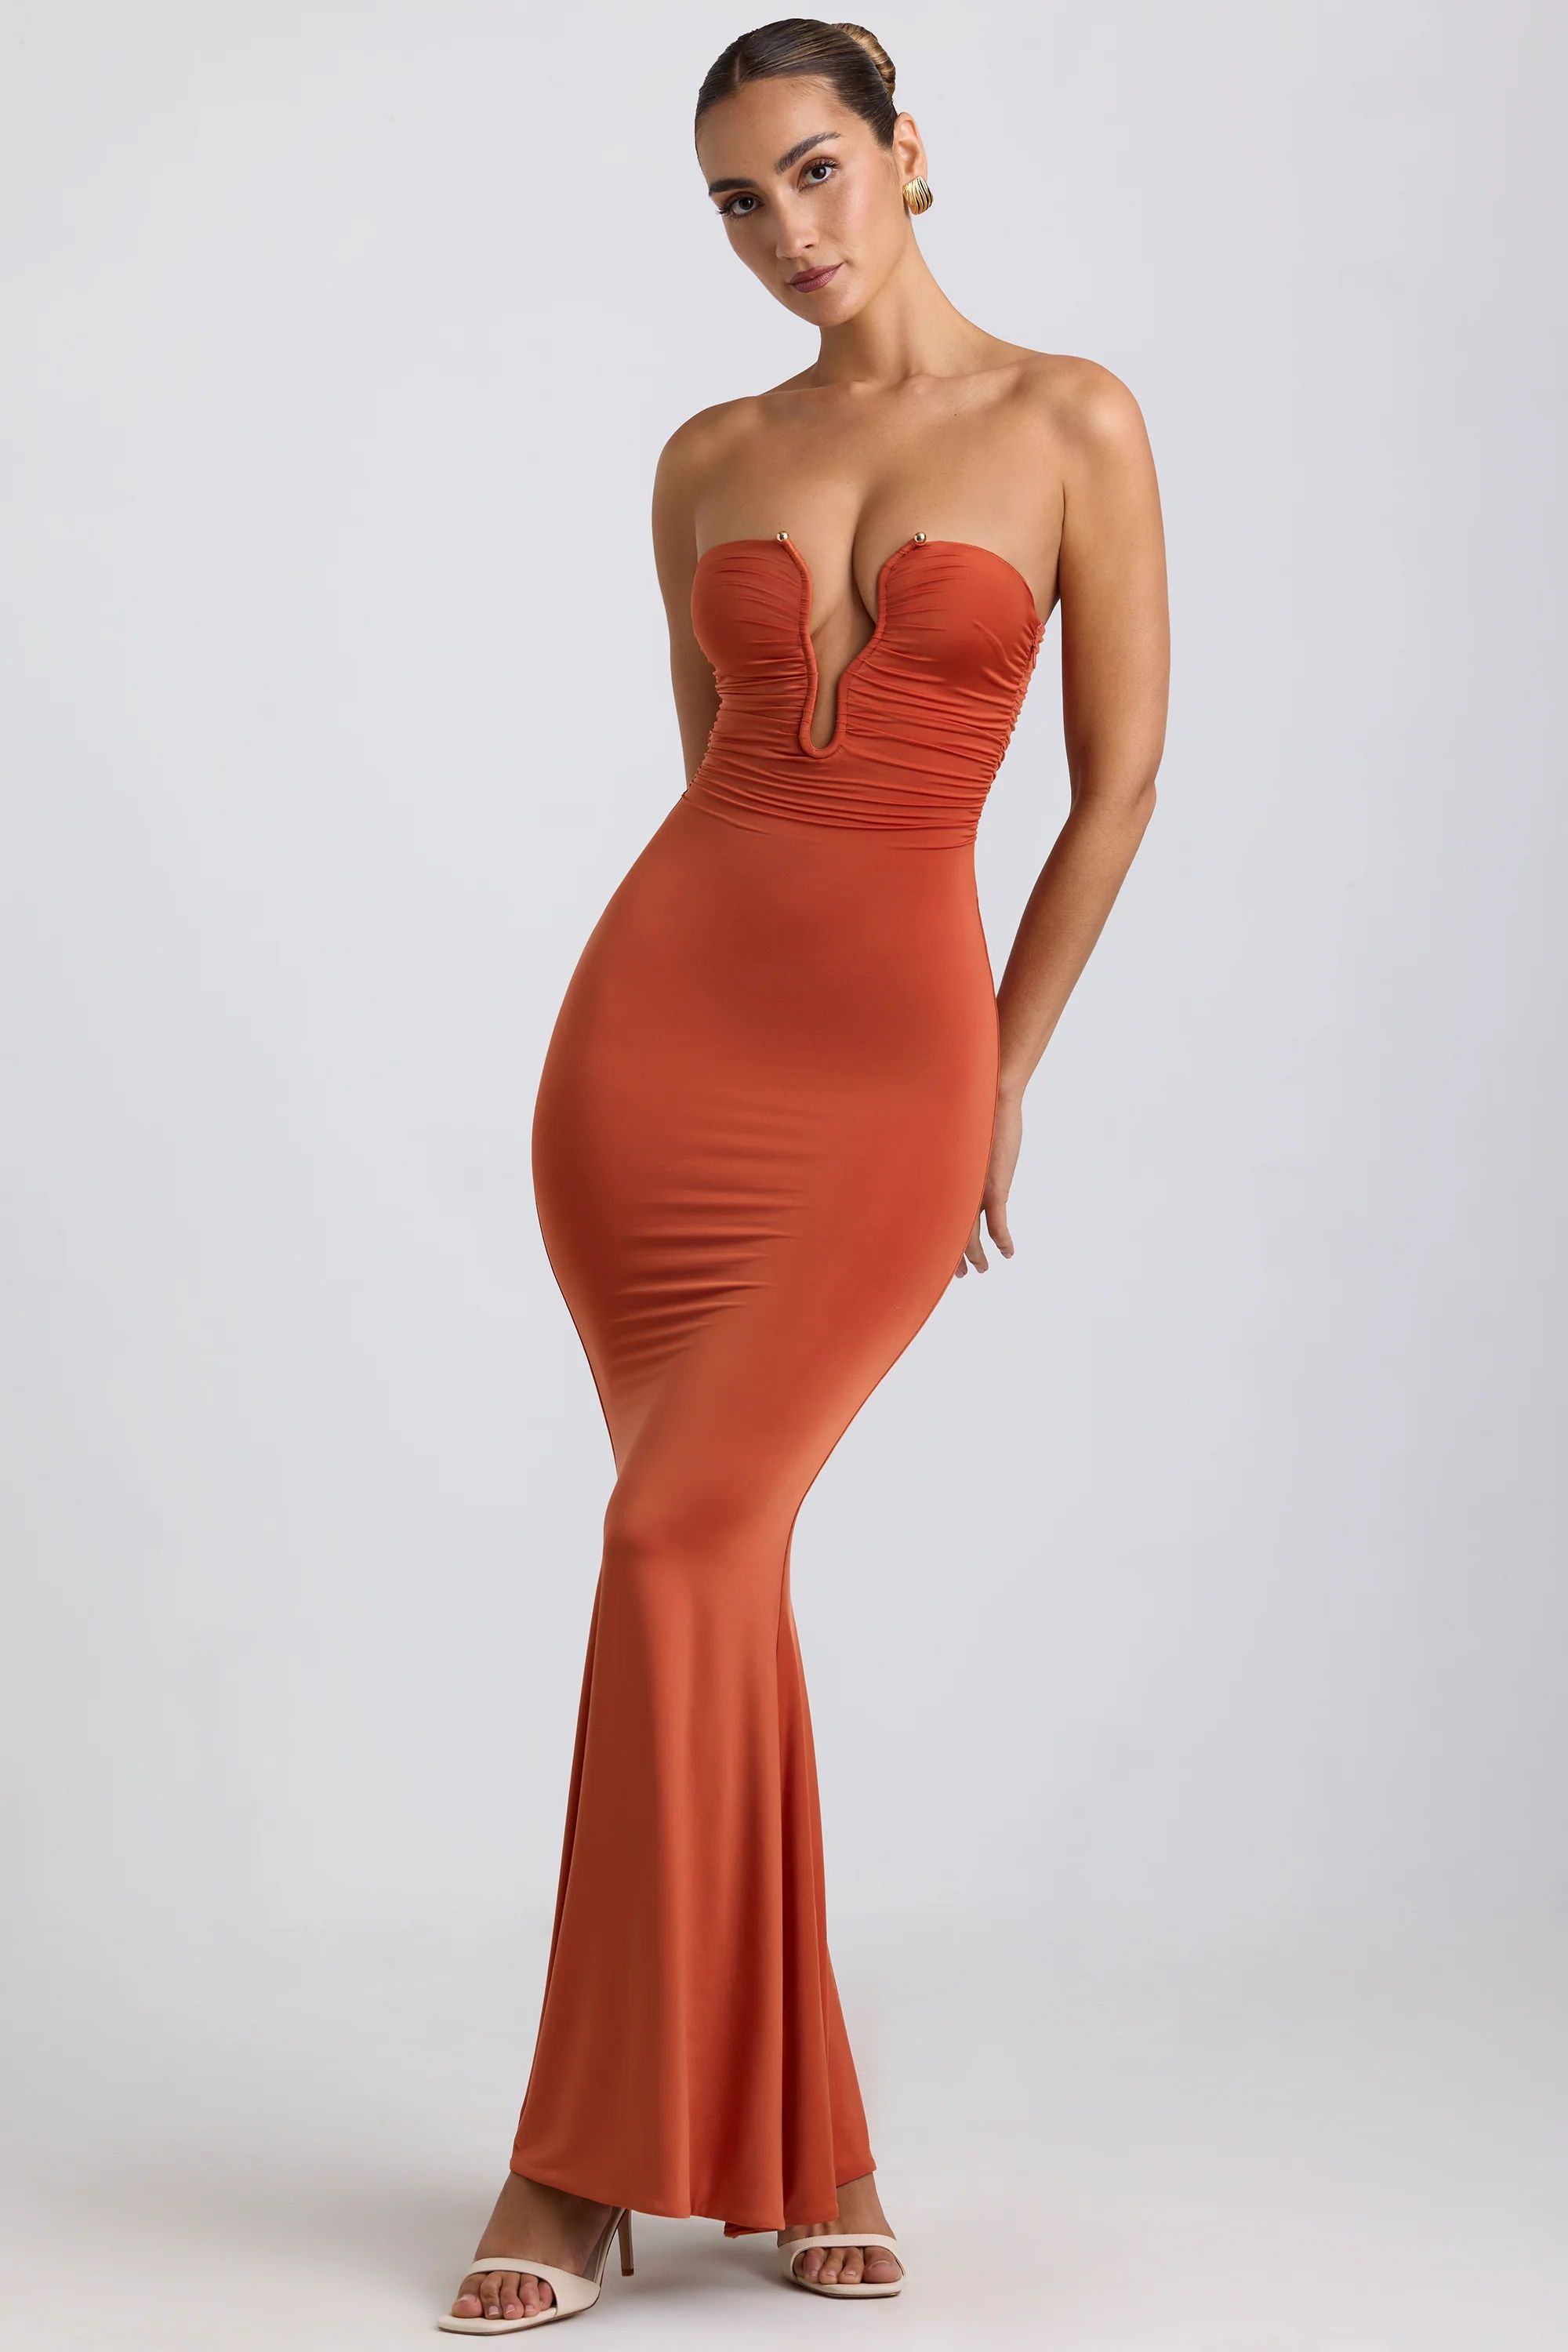 Slinky Jersey Hardware Detail Strapless Maxi Dress in Burnt Orange | Oh Polly